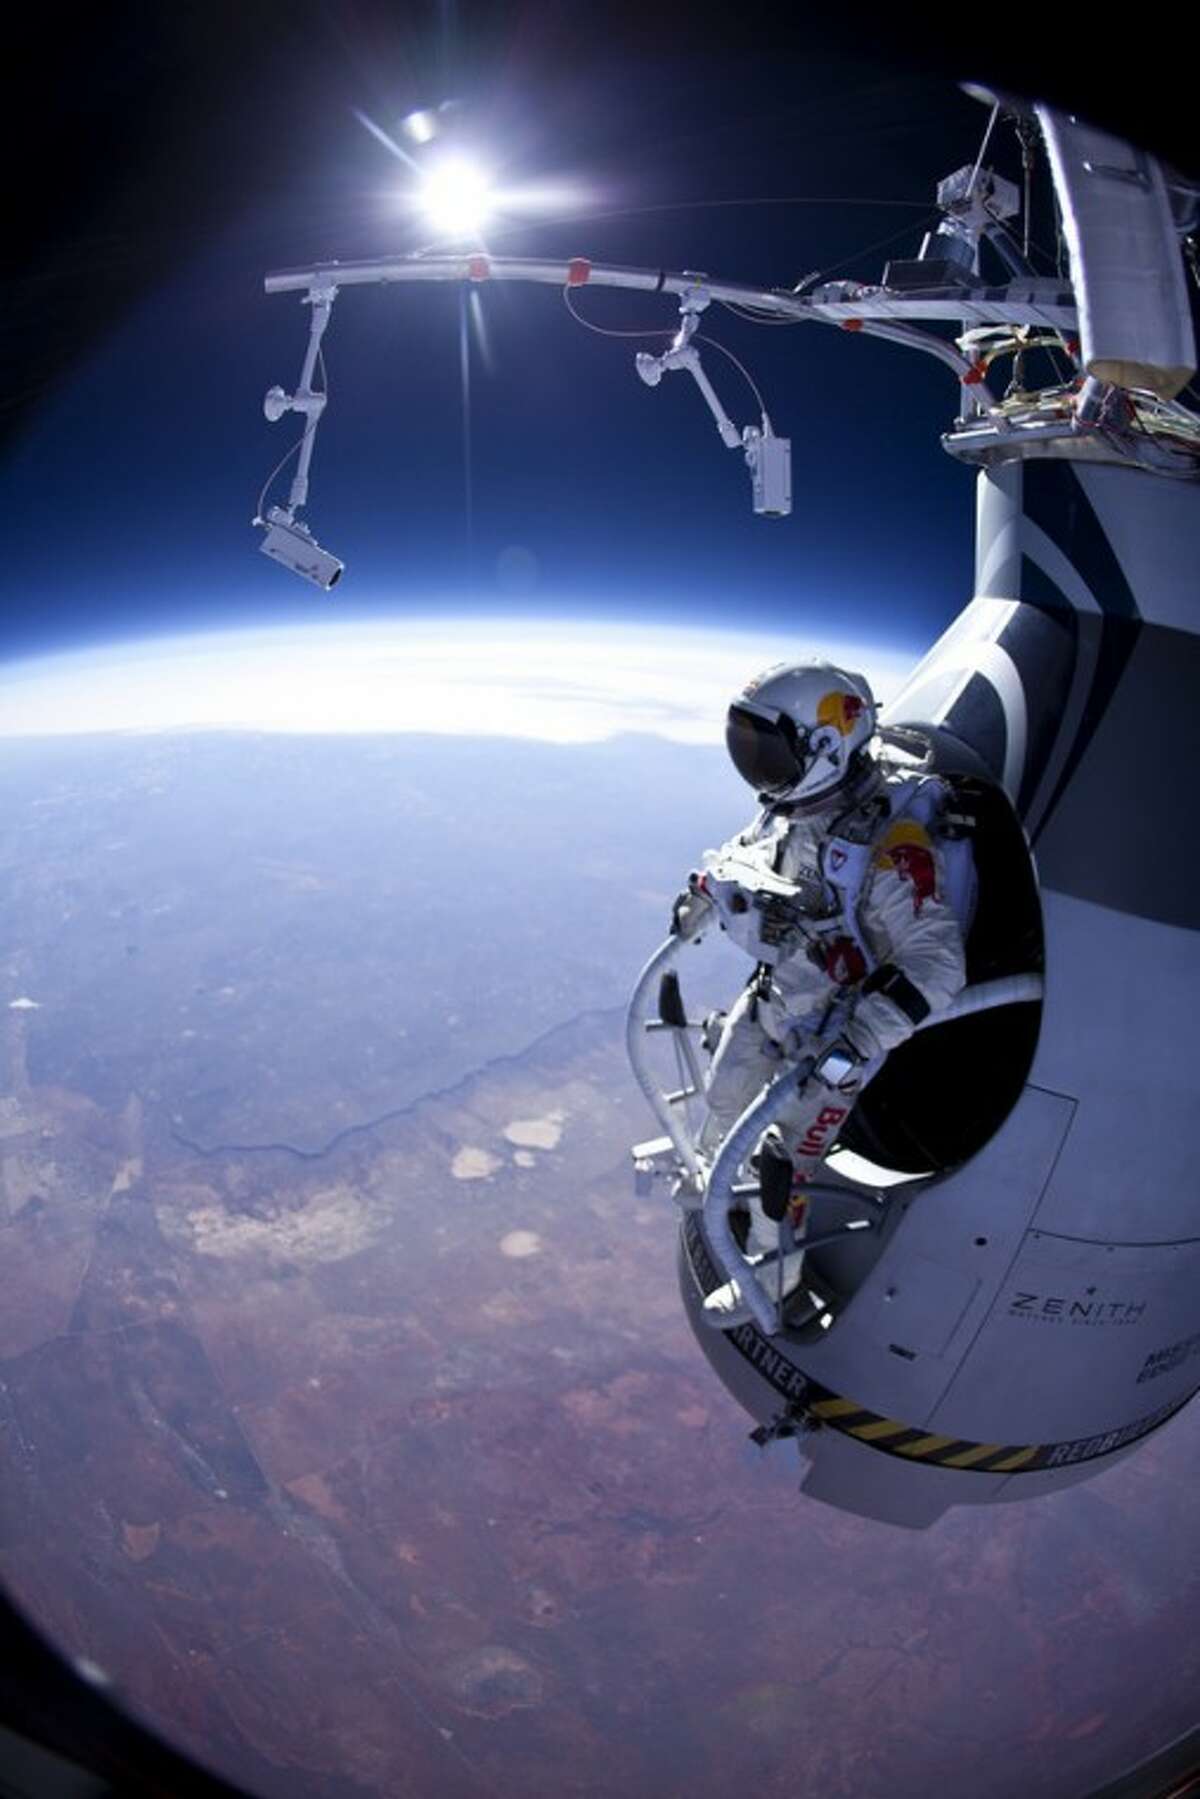 FILE - In this Thursday, March 15, 2012 photo provided by Red Bull Stratos, Felix Baumgartner prepares to jump during the first manned test flight for Red Bull Stratos over Roswell, N.M. On Wednesday, July 25, 2012, the 43-year-old Austrian plunged to Earth from an altitude of more than 18 miles landing safely near Roswell, N.M. It's was second stratospheric leap for "Fearless Felix." He's aiming for a record-breaking jump from 125,000 feet, or 23 miles, in another month. He hopes to go supersonic, breaking the speed of sound with just his body. (AP Photo/Red Bull Stratos, Jay Nemeth)